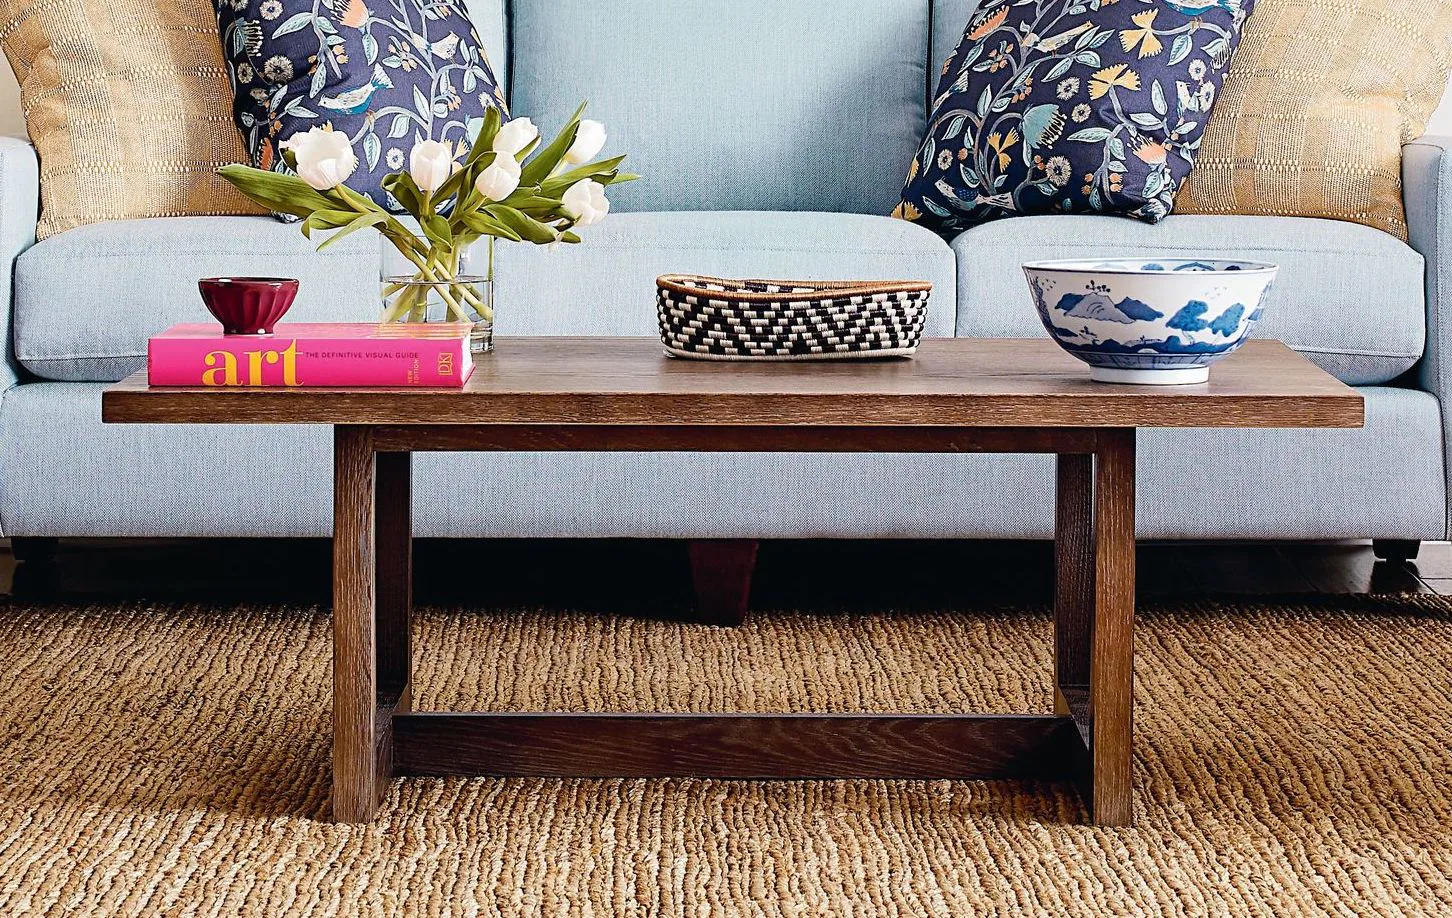 How to Decorate a Coffee Table